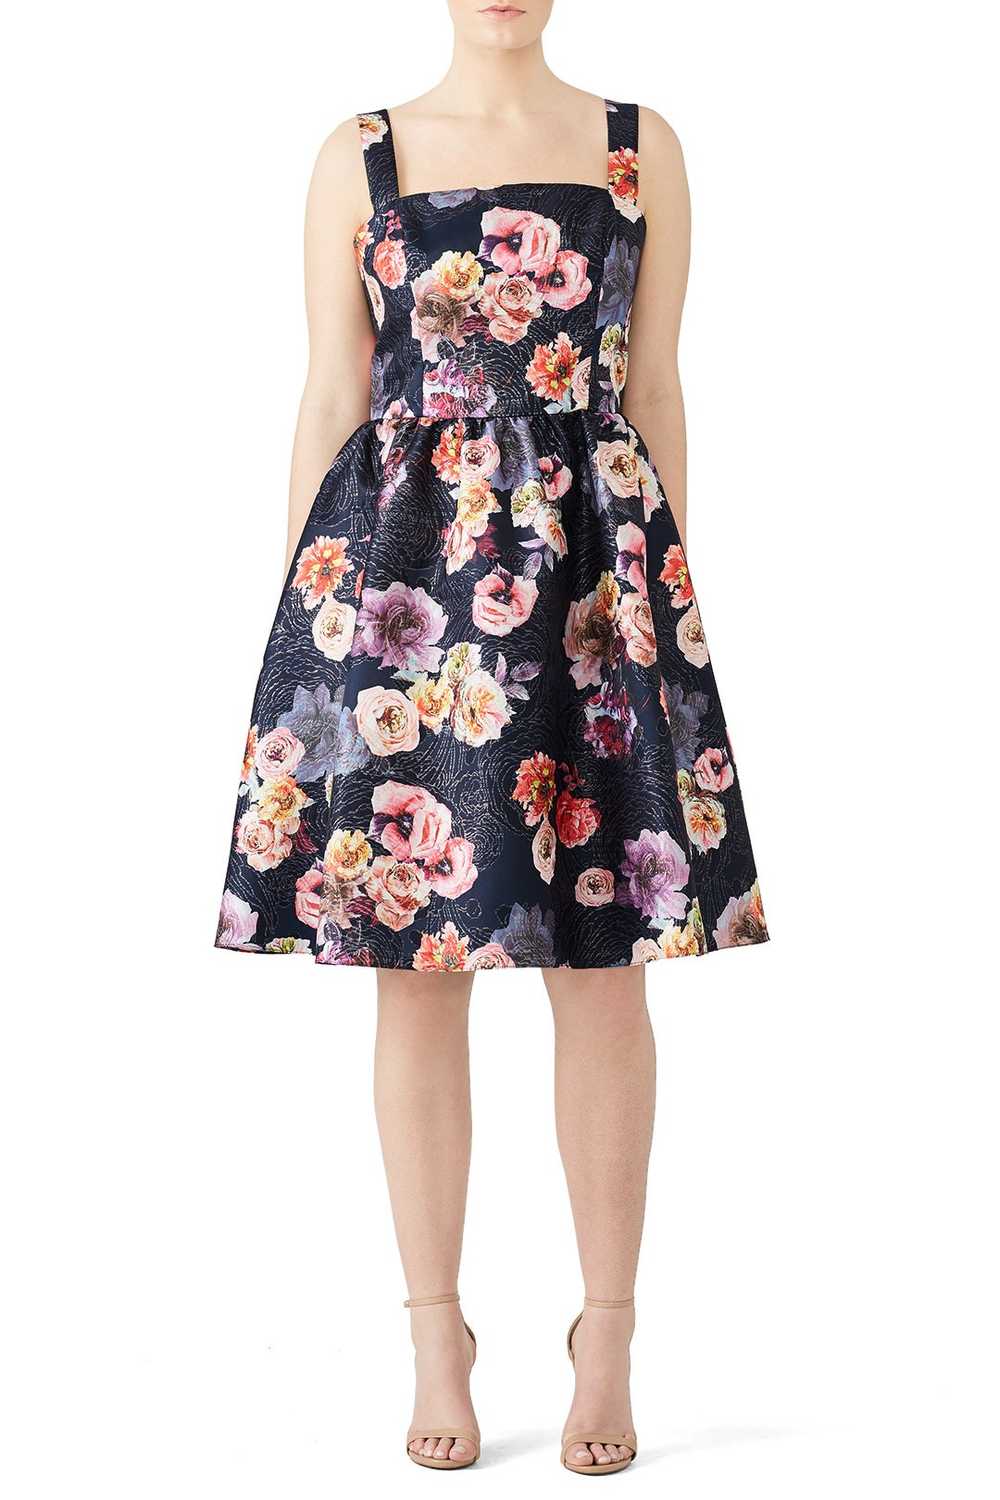 Christian Siriano Black Floral Cocktail Dress - image 3